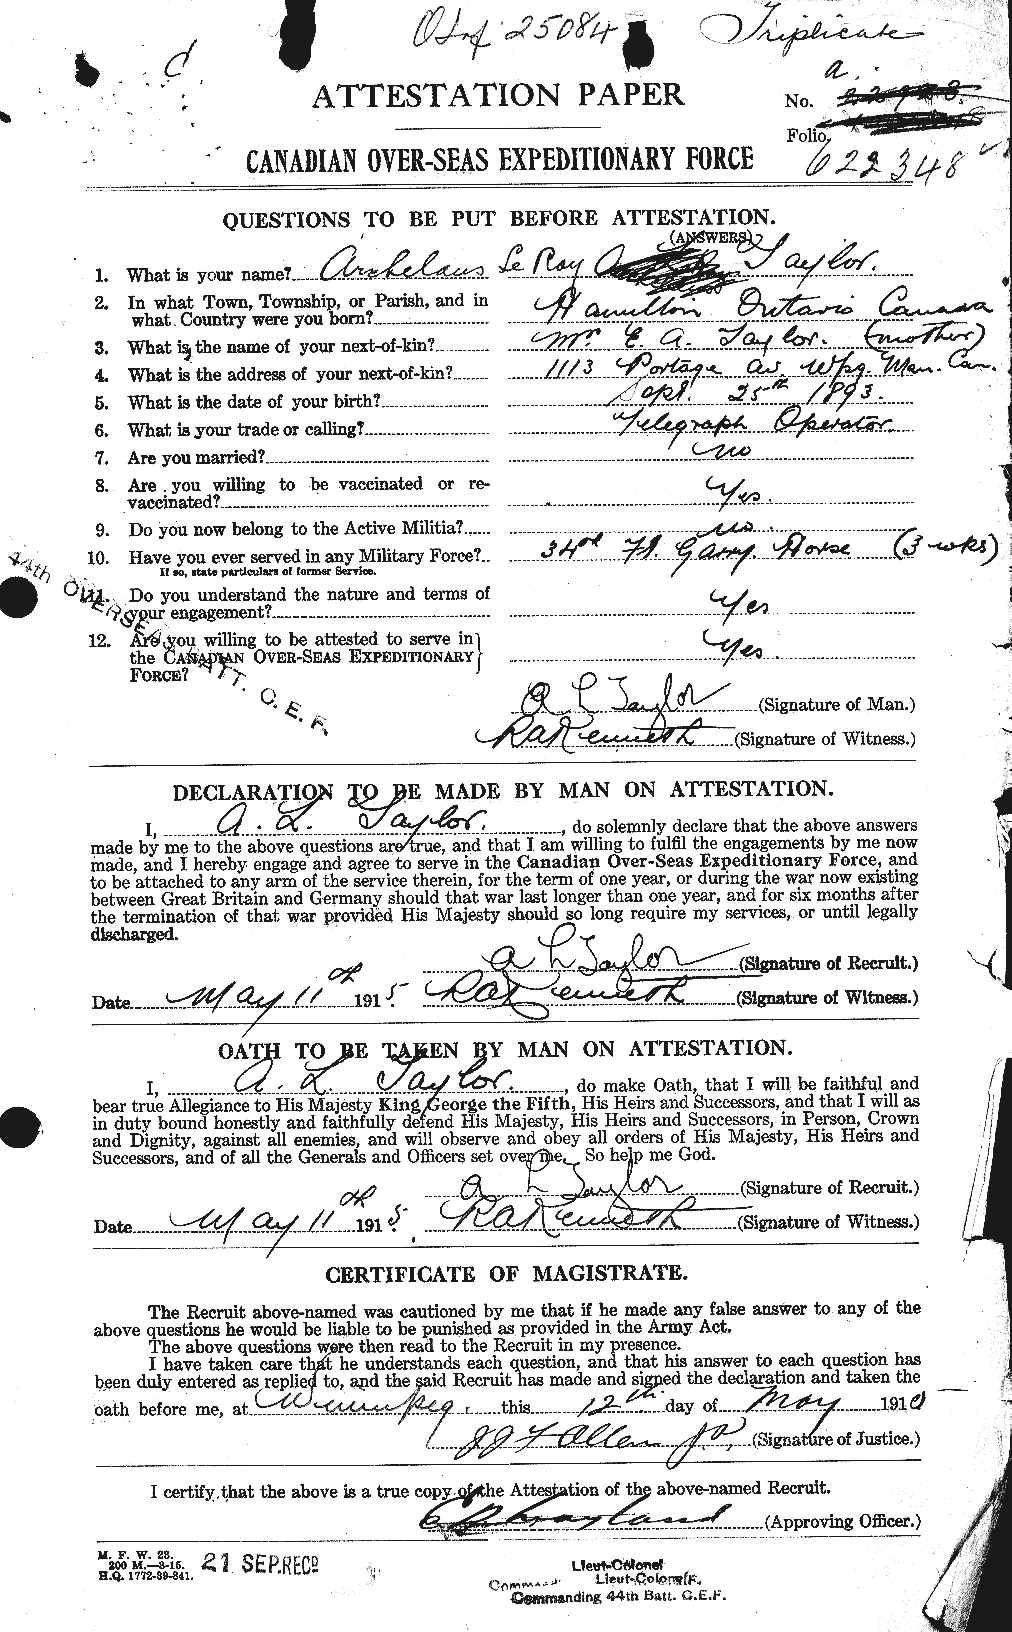 Personnel Records of the First World War - CEF 626235a